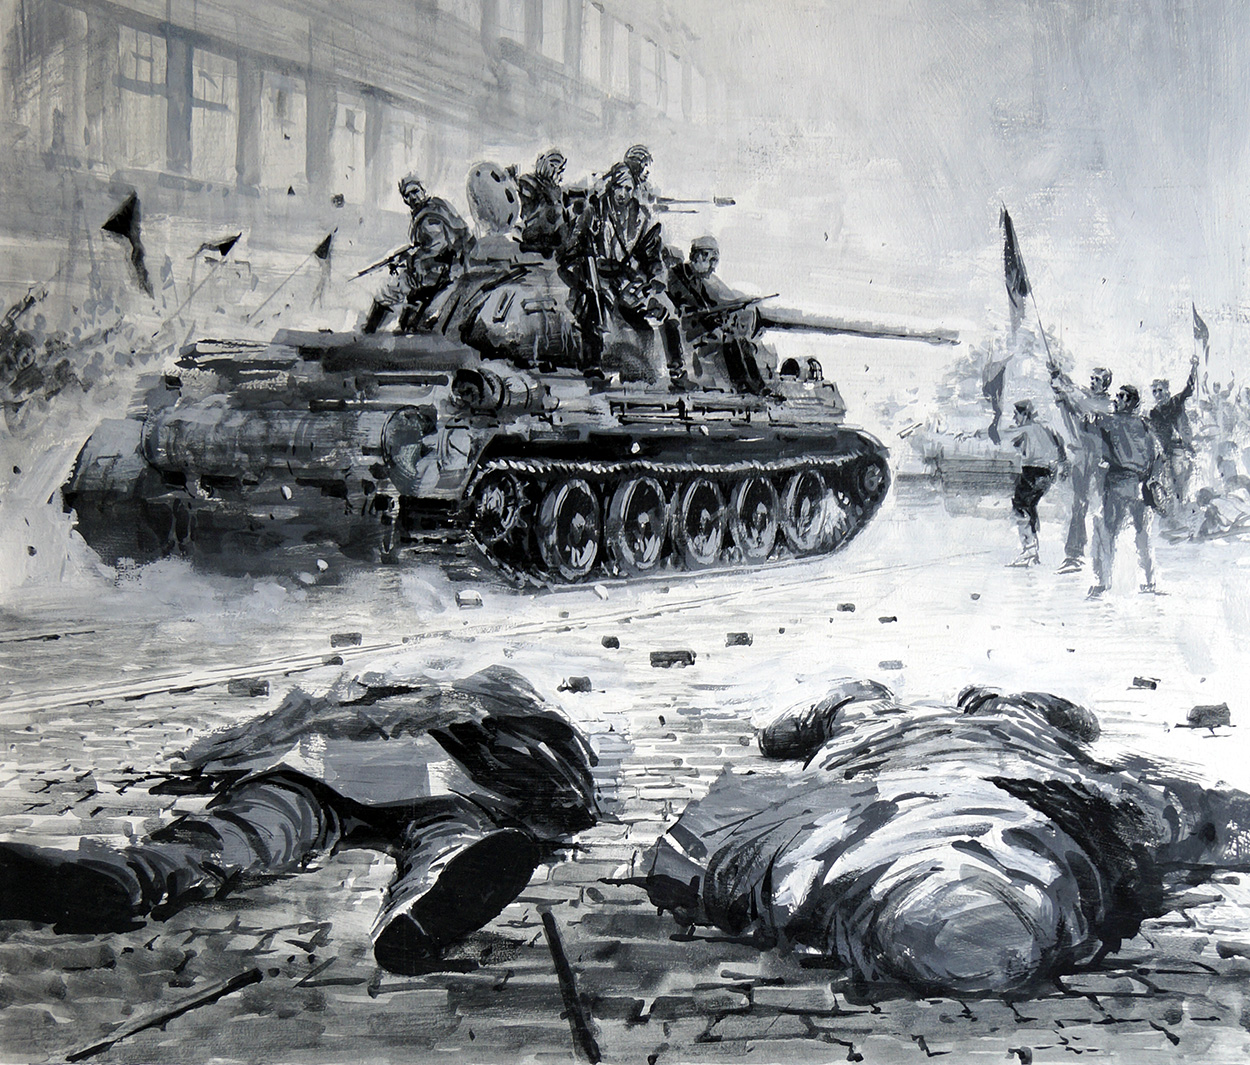 Hungarian Uprising (Original) art by Other Military Art (Coton) at The Illustration Art Gallery